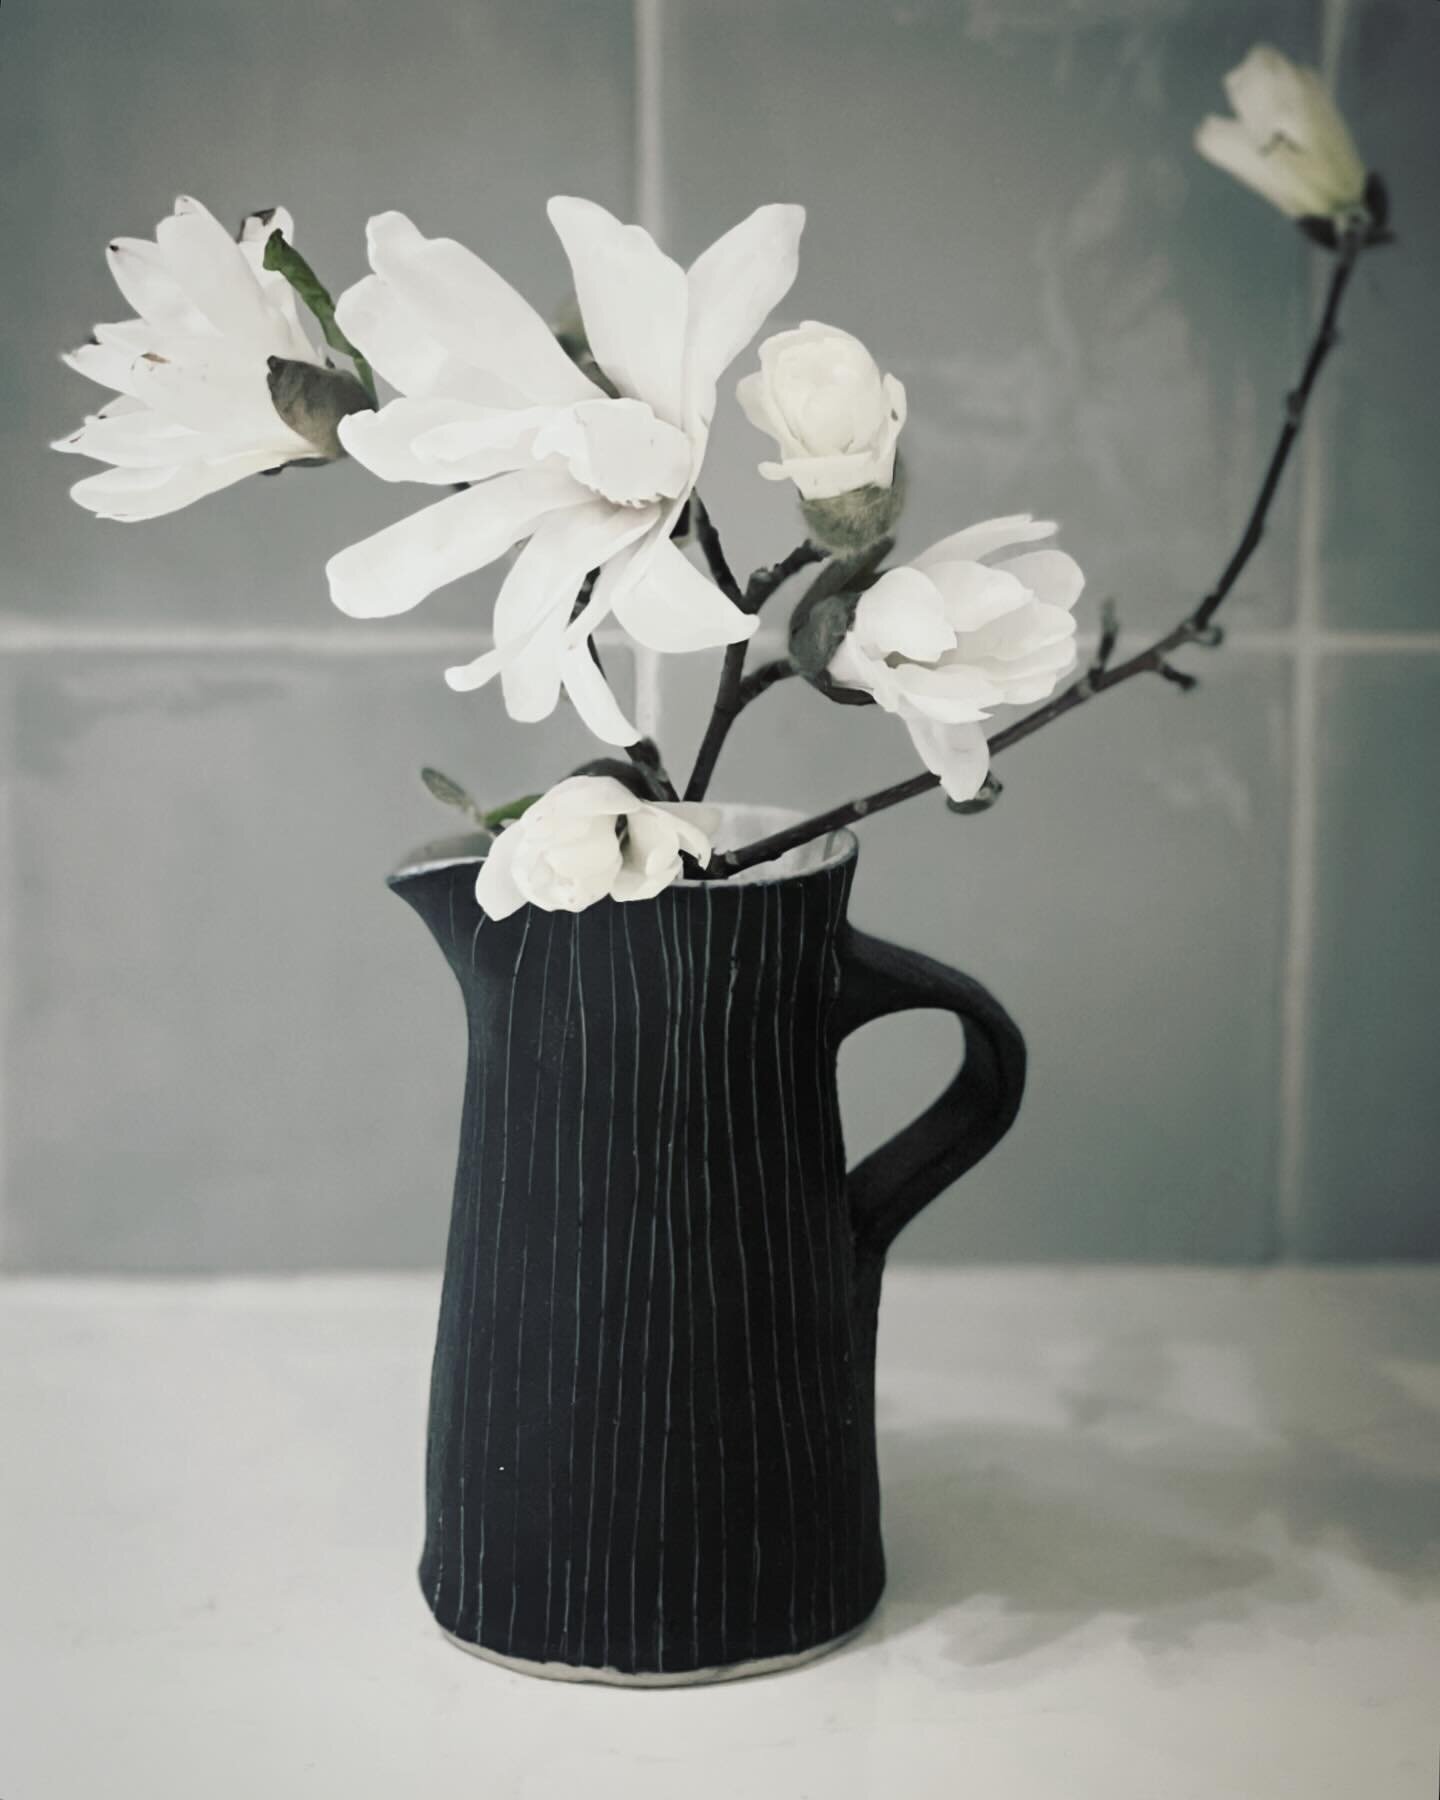 Star Magnolia in a thrown piece from the archive.

It&rsquo;s beautiful but only in bloom for 2 weeks of the year so need to make the most of it. A sign that spring is on its way 🌿🌱

#starmagnolia #ceramics #clay #thrown #archive #japanese #flowers